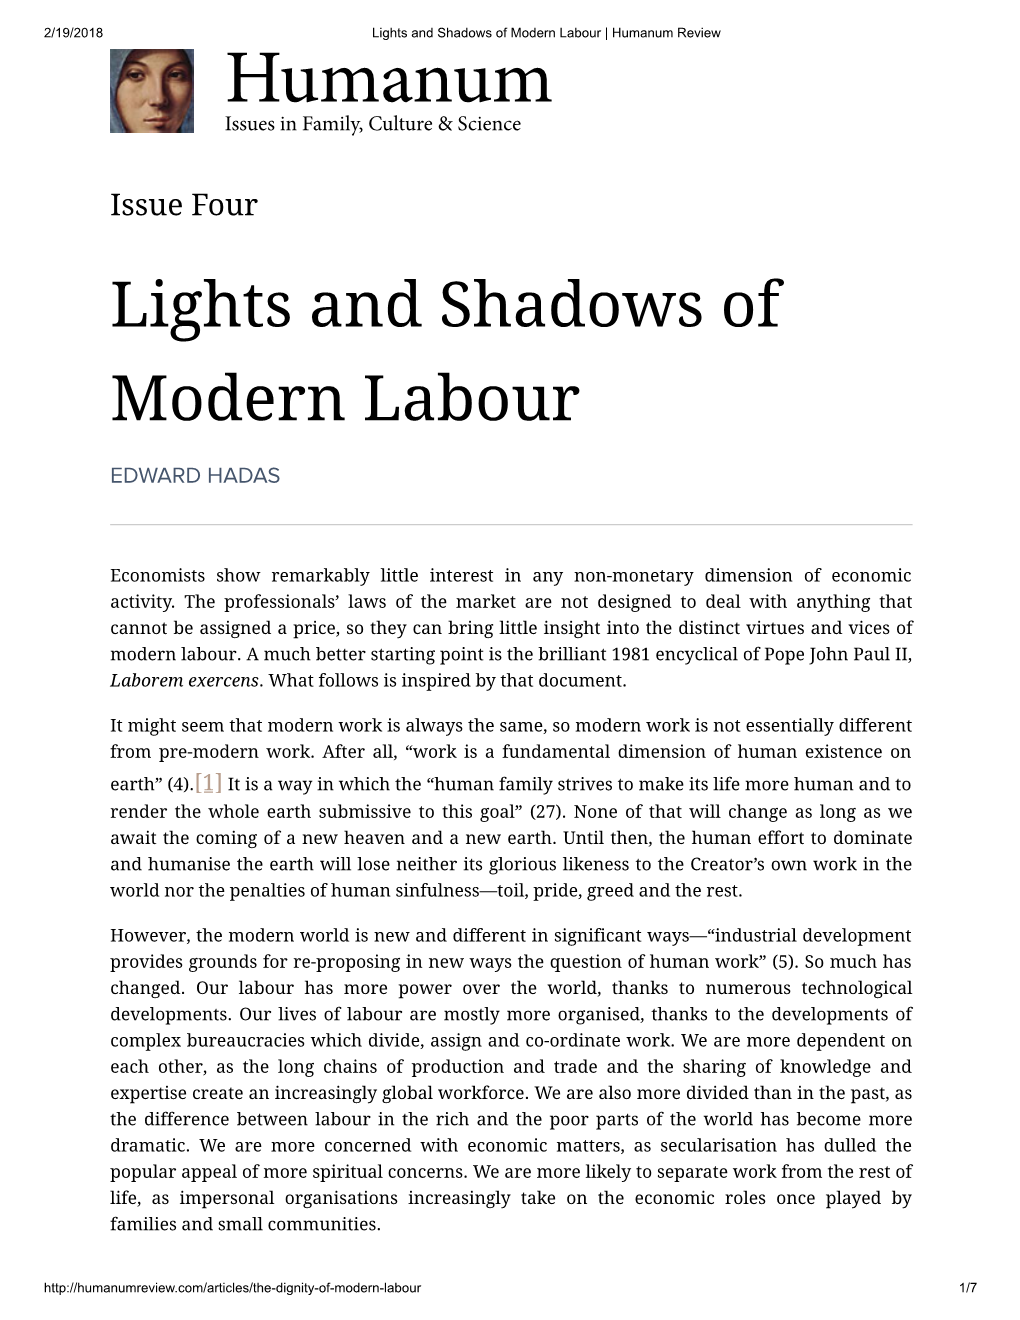 Lights-And-Shadows-Of-Modern-Labour- -Humanum-Review.Pdf